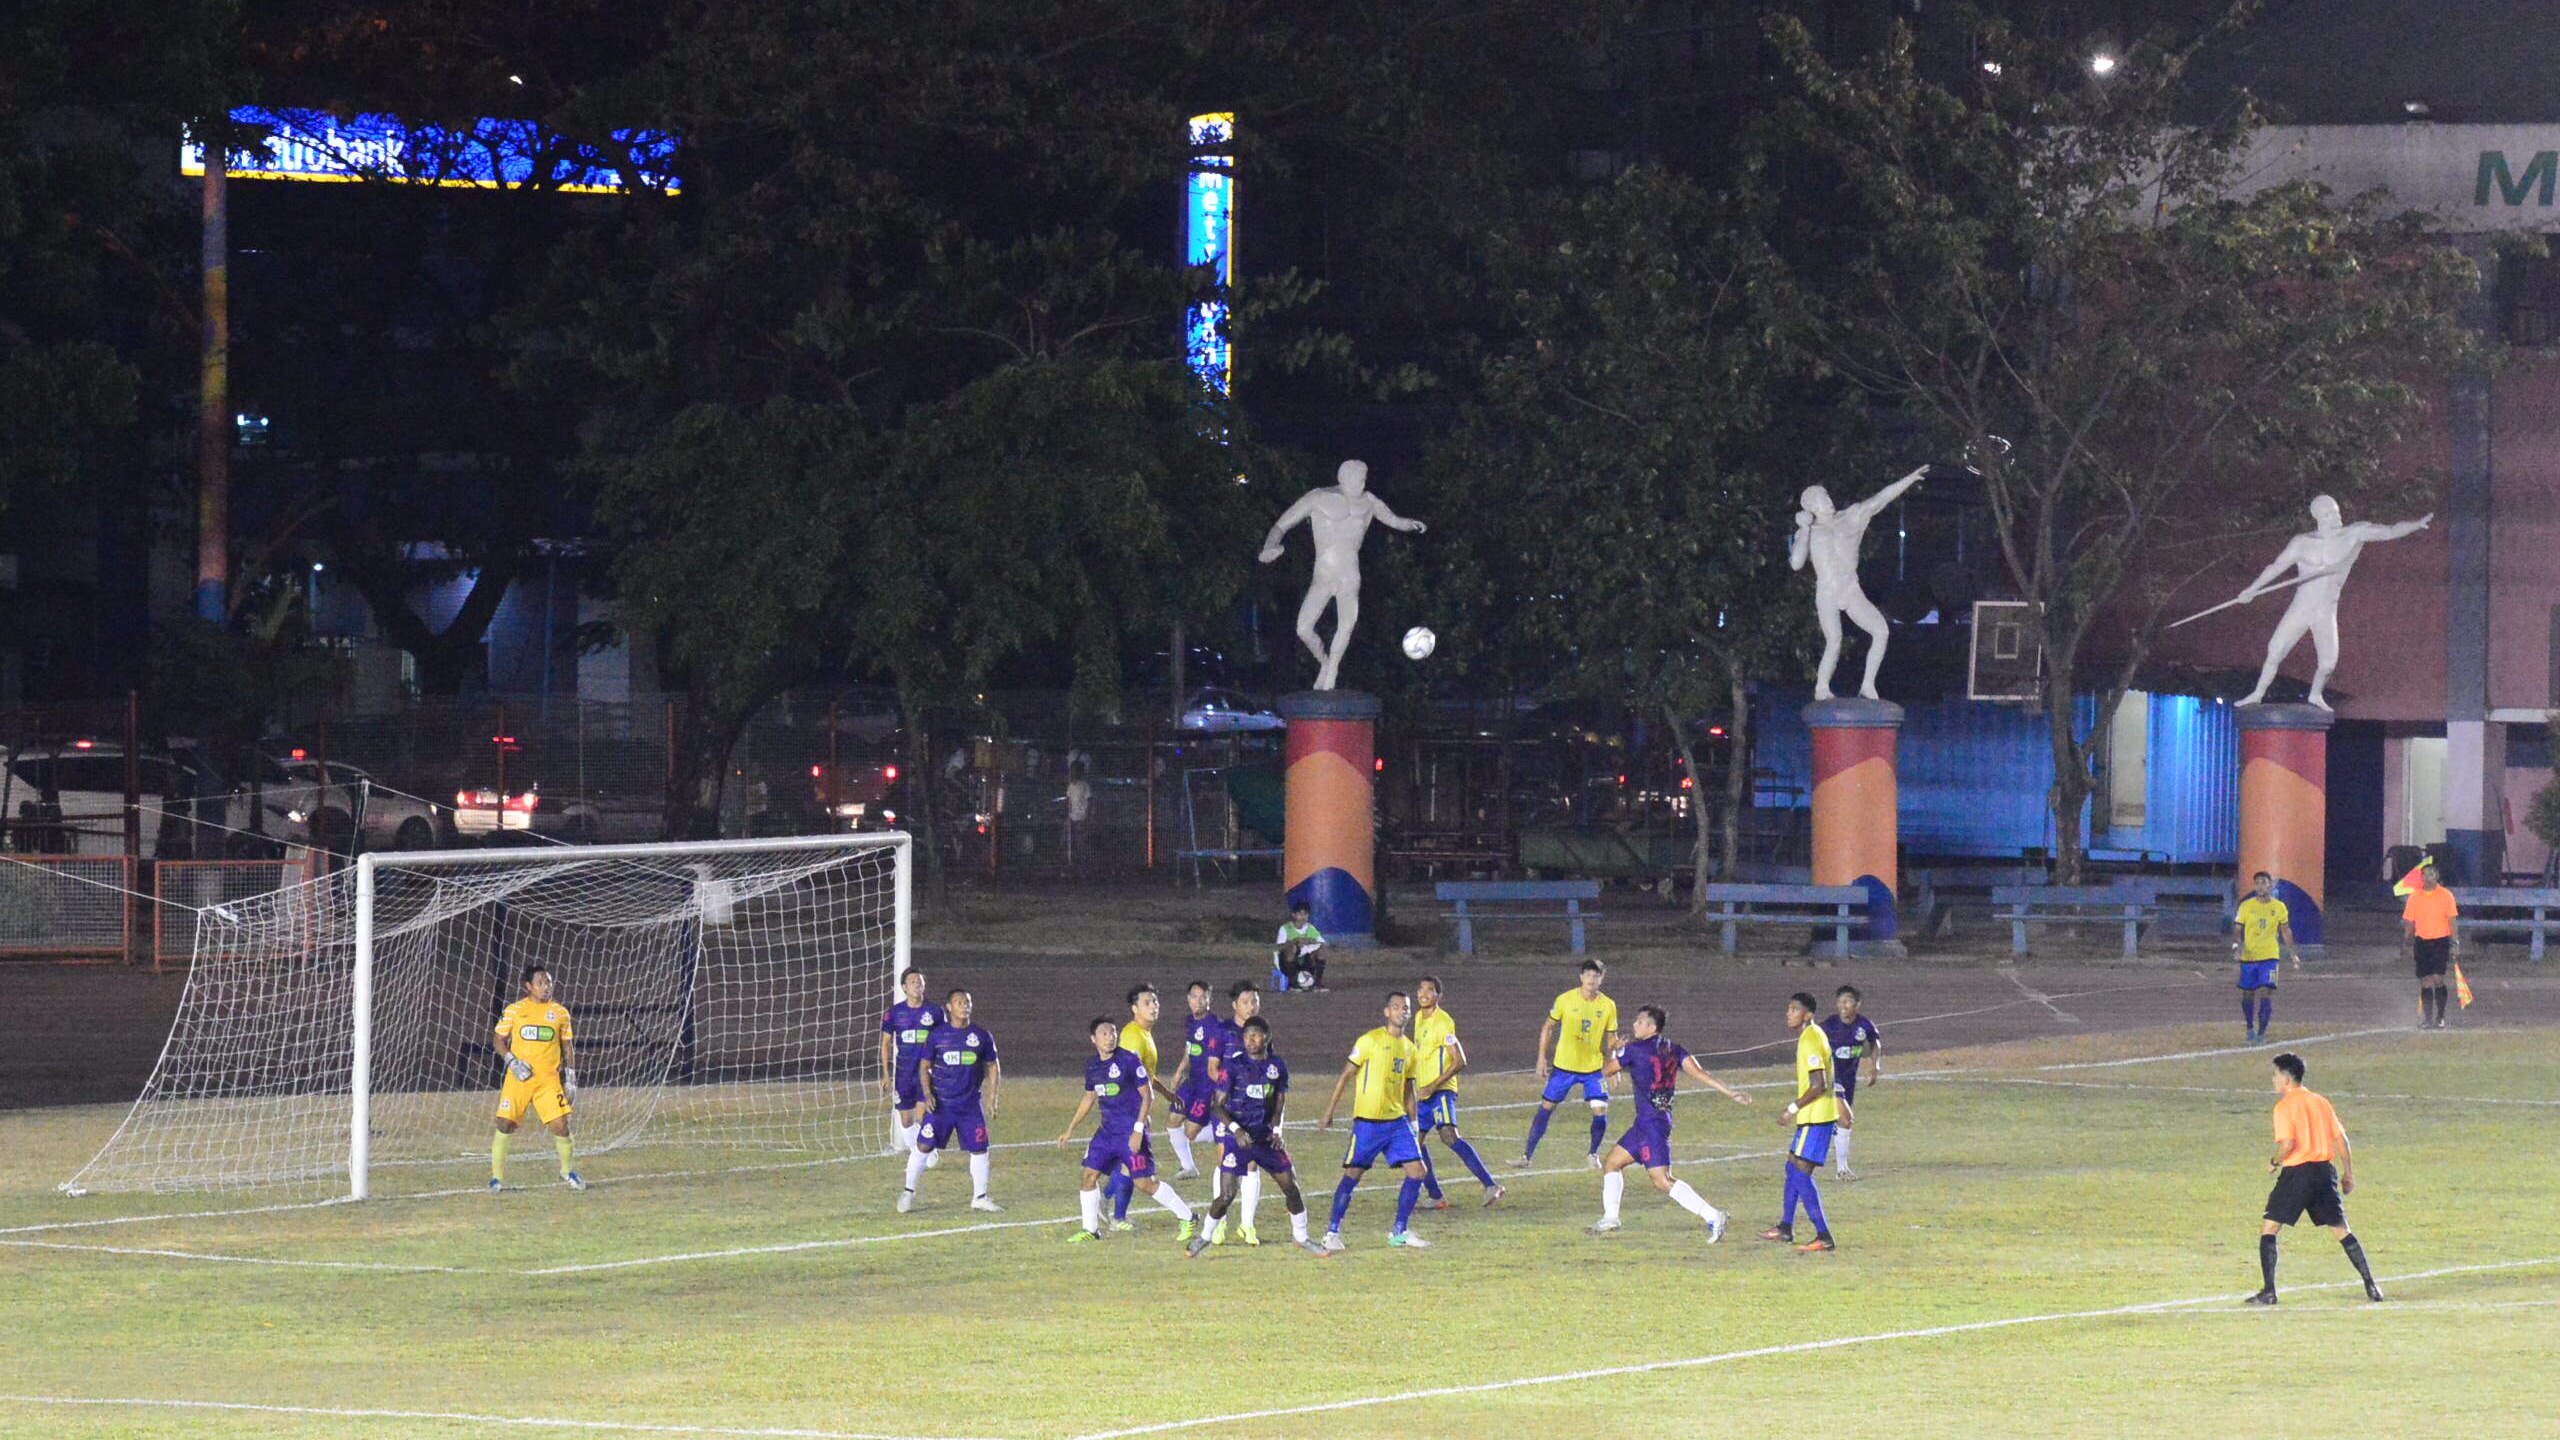 UNIQUE. Greco athletes tower over pitch, where JPV Marikina hosted Global Cebu in the opener of the Philippines Football League. It was the first home game of Marikina in a pitch that is truly their home. Photo by Bob Guerrero  